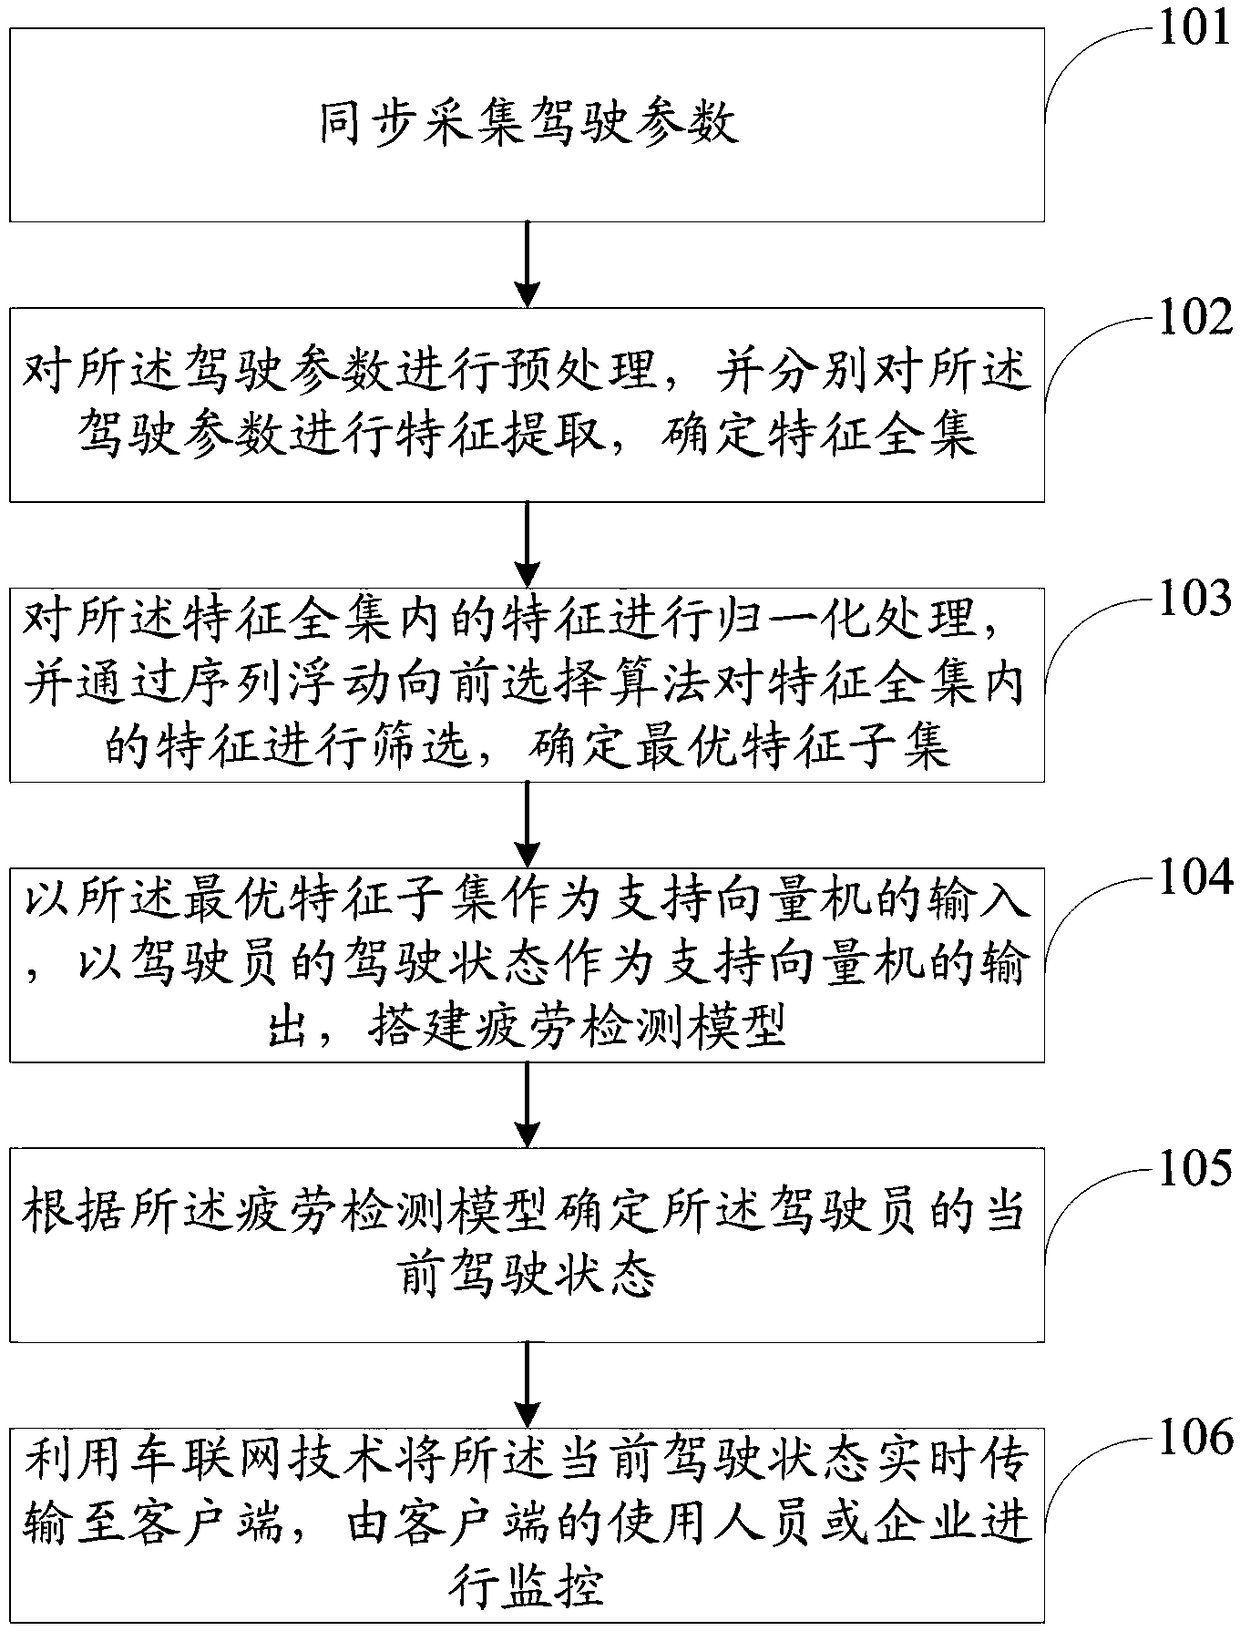 Driver fatigue driving monitoring and warning method and system based on Internet of Vehicles